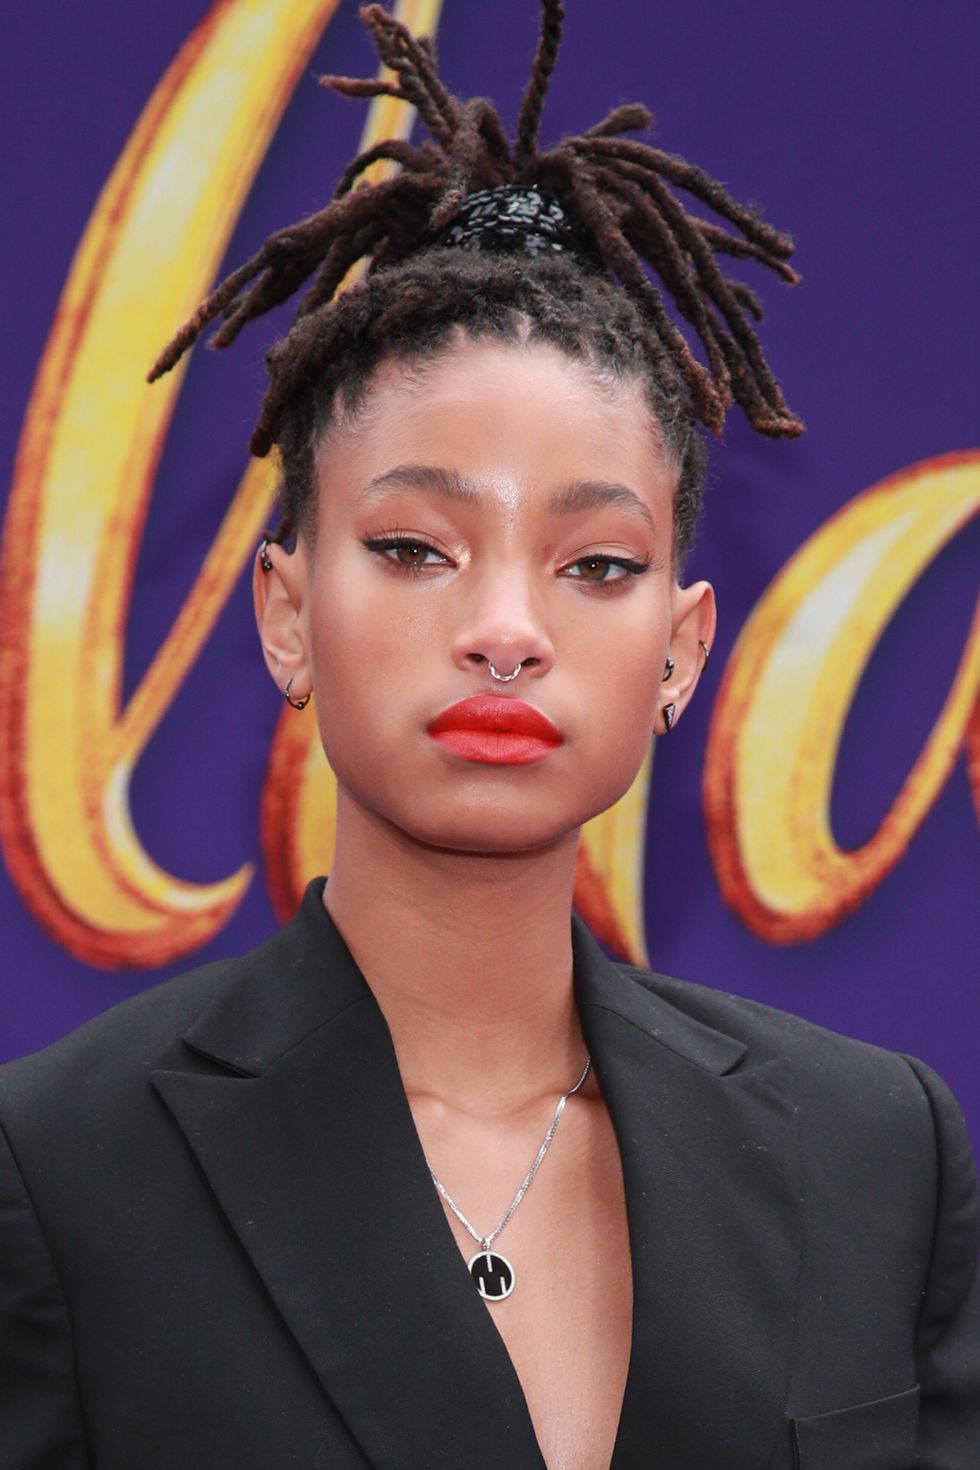 willow-smith-attends-the-premiere-of-disneys-aladdin-on-may-news-photo-1585079828.jpg?crop=1xw:1xh;center,top&resize=980:*